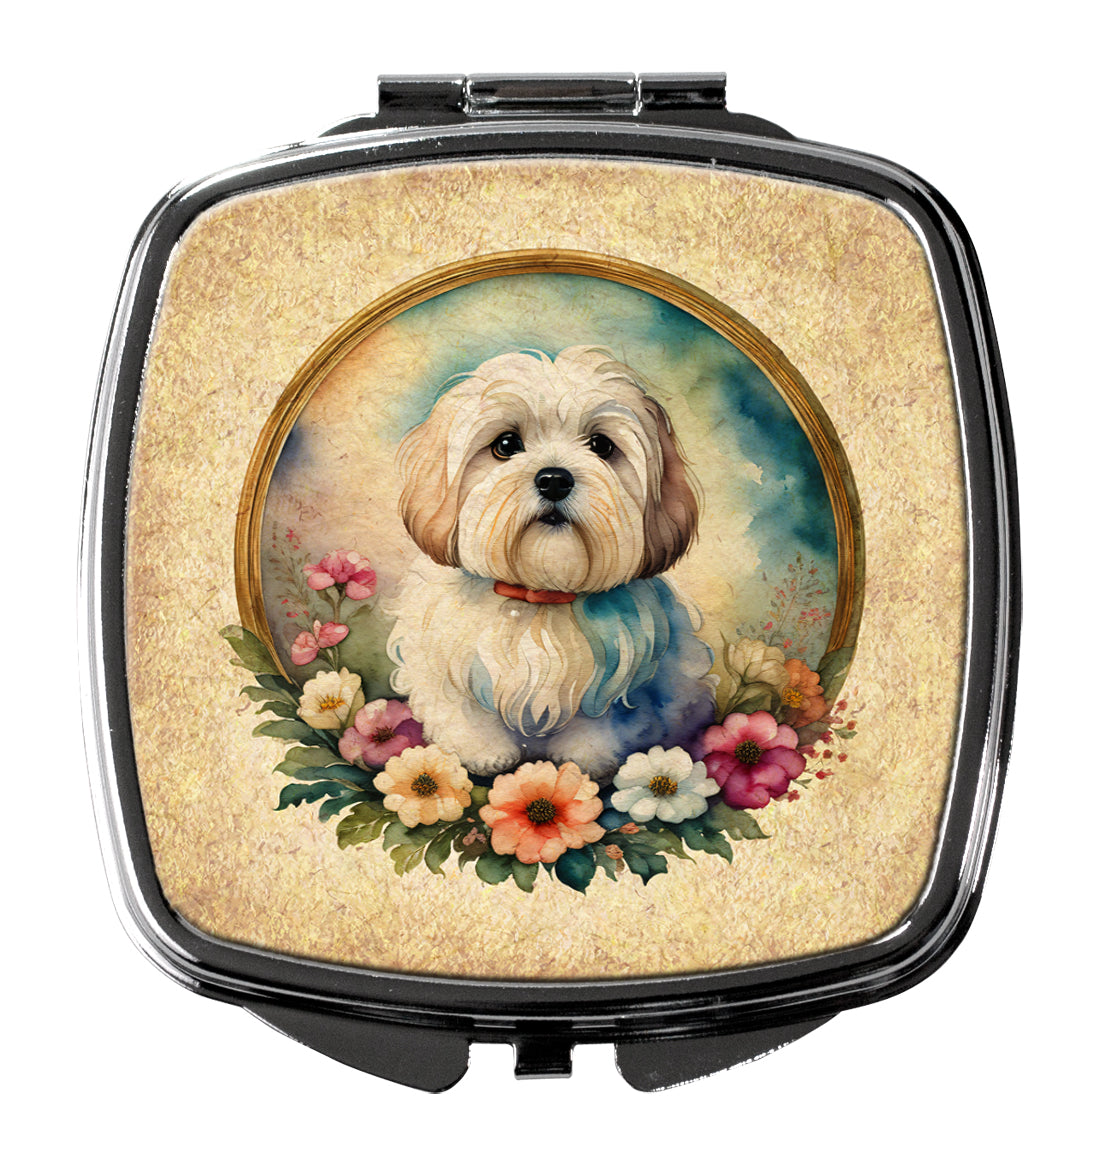 Buy this Coton De Tulear and Flowers Compact Mirror